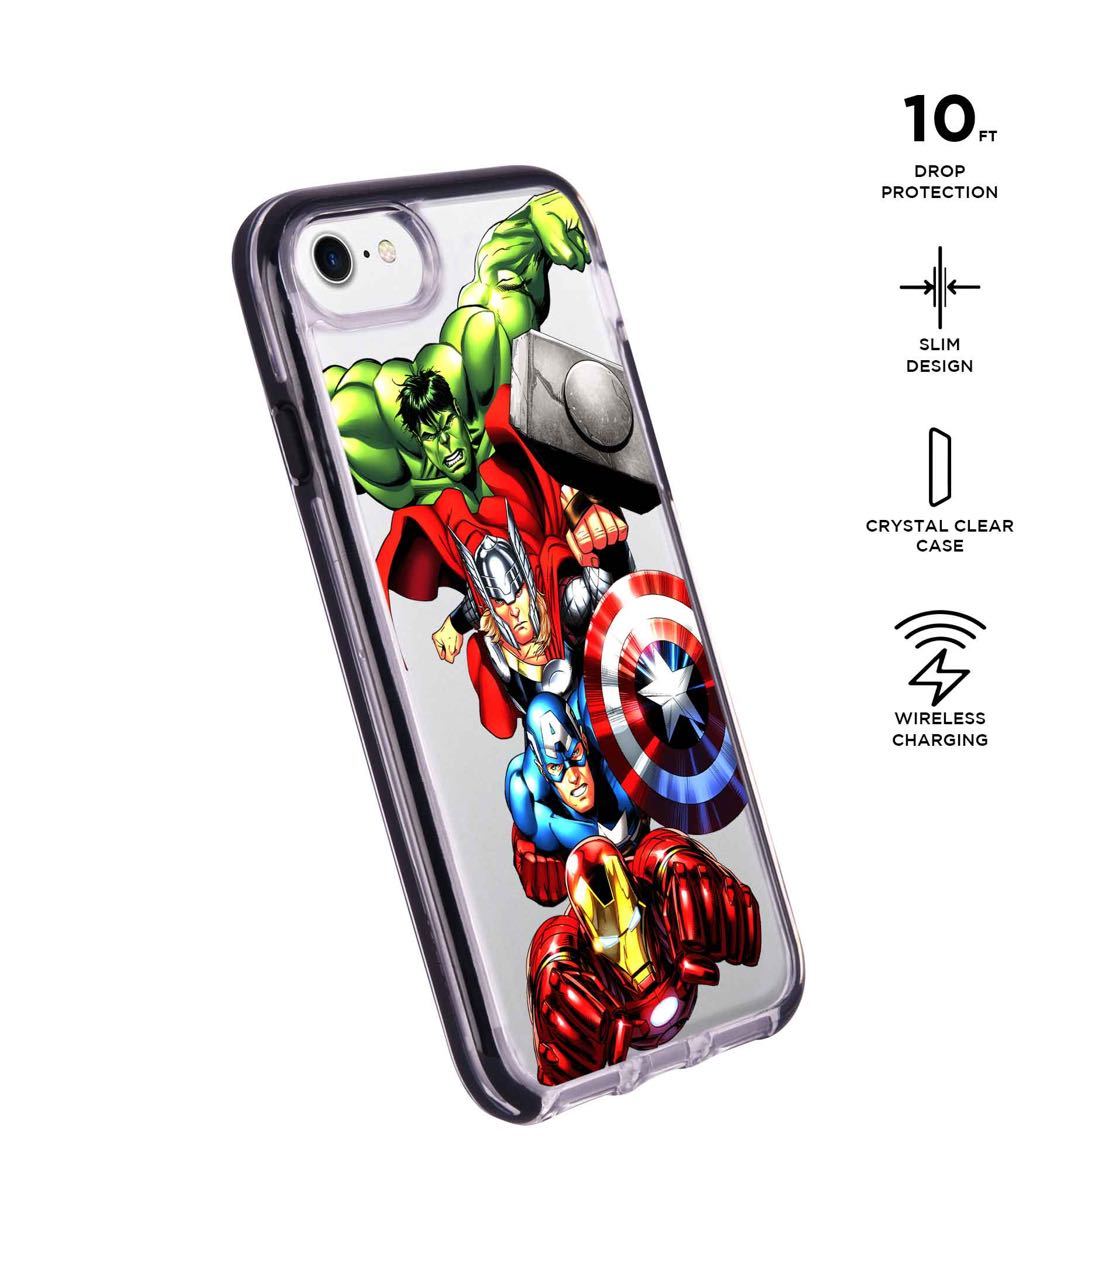 Avengers Fury - Extreme Phone Case for iPhone 7